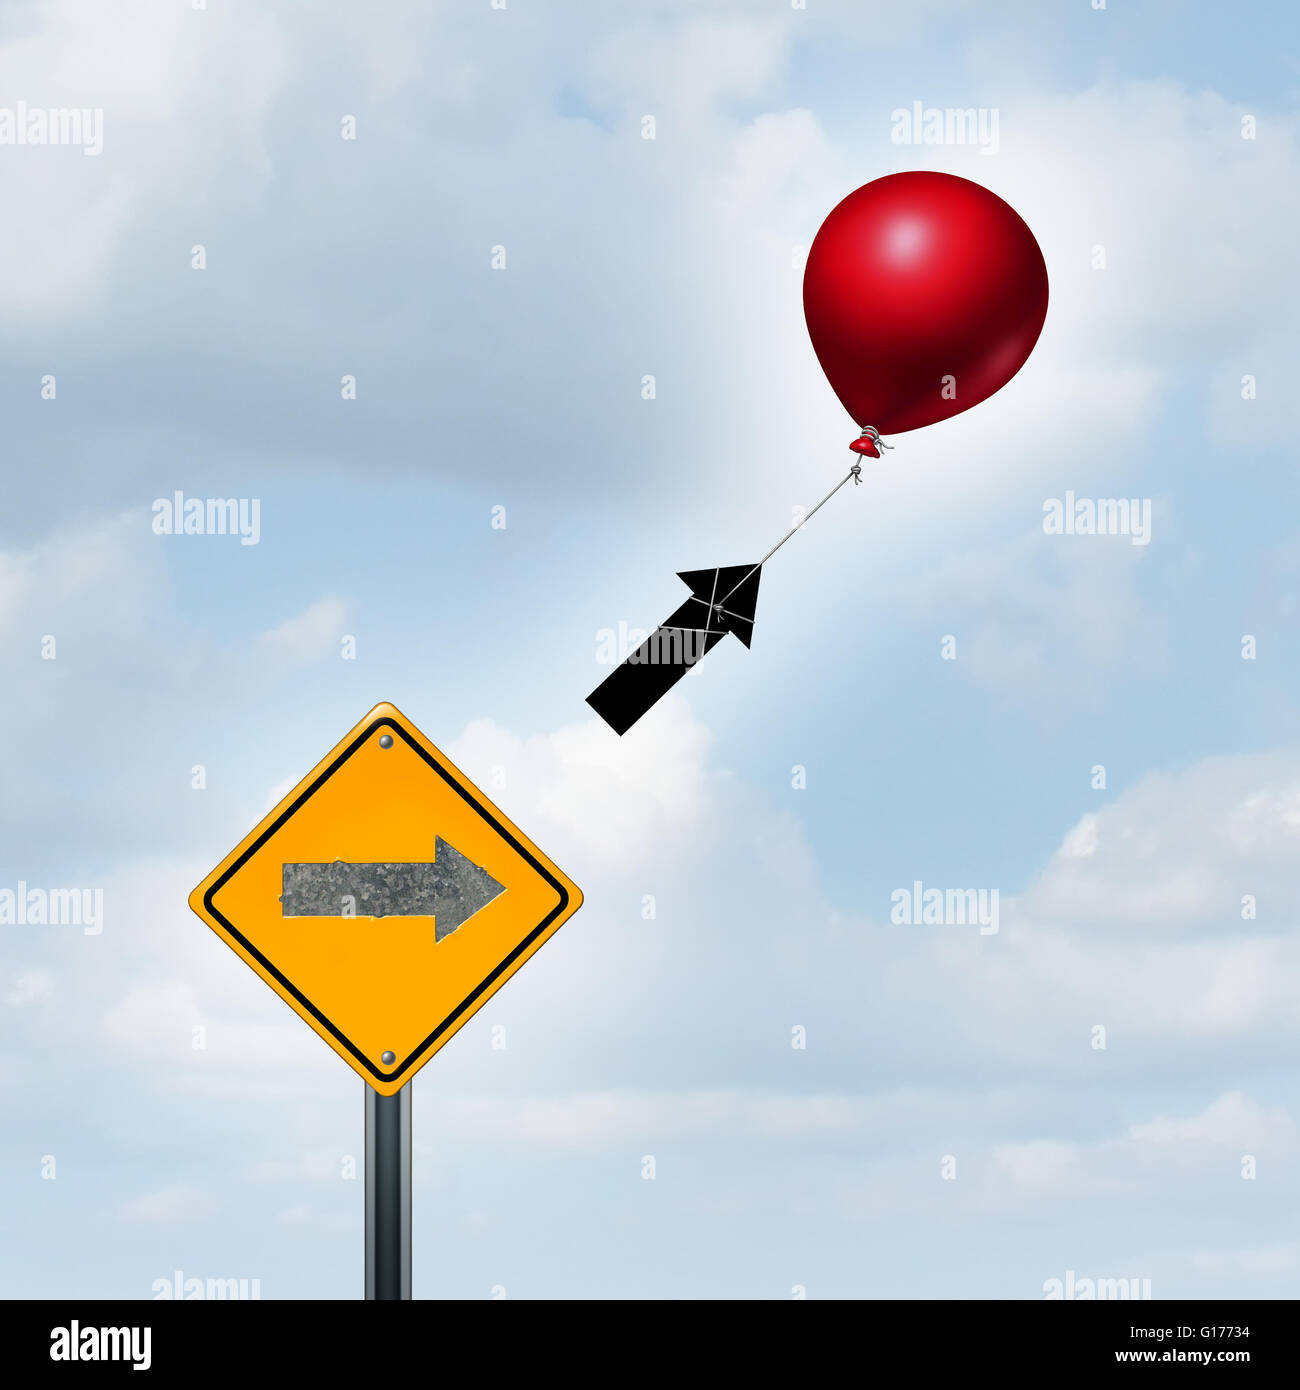 Concept of consulting and supportive marketing idea as a balloon lifting up an arrow from a sign as a success metaphor and higher prosperity strategy with 3D illustration elements. Stock Photo